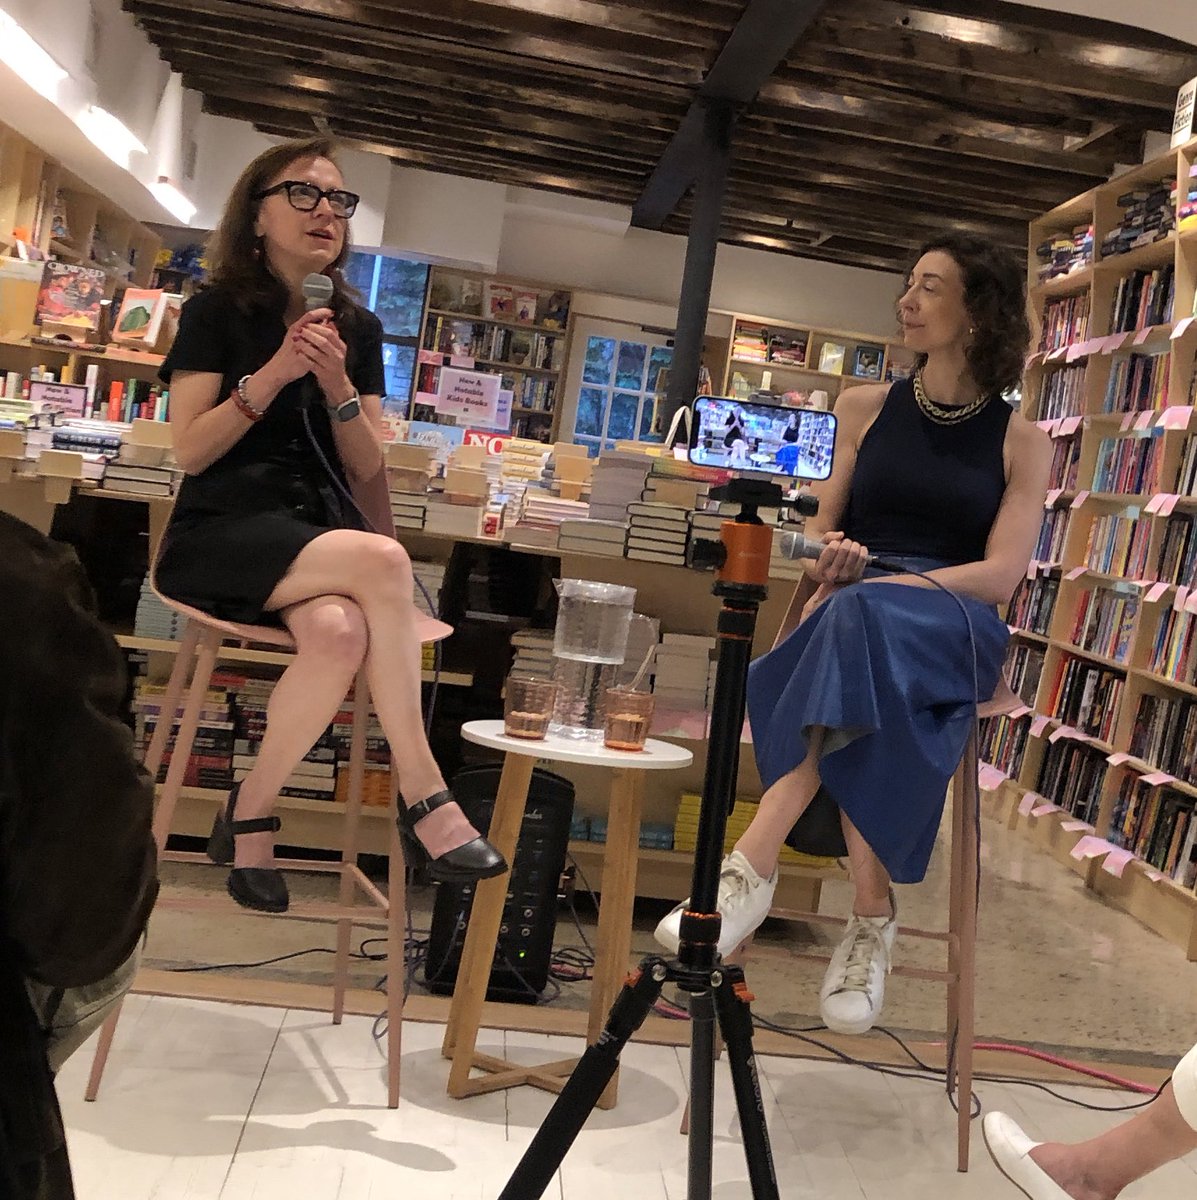 Sold out packed house on this summery night for @meganeabbott in conversation with @andibartz #BewaretheWoman #TheSpareRoom #BooksAreMagic #Thrillers